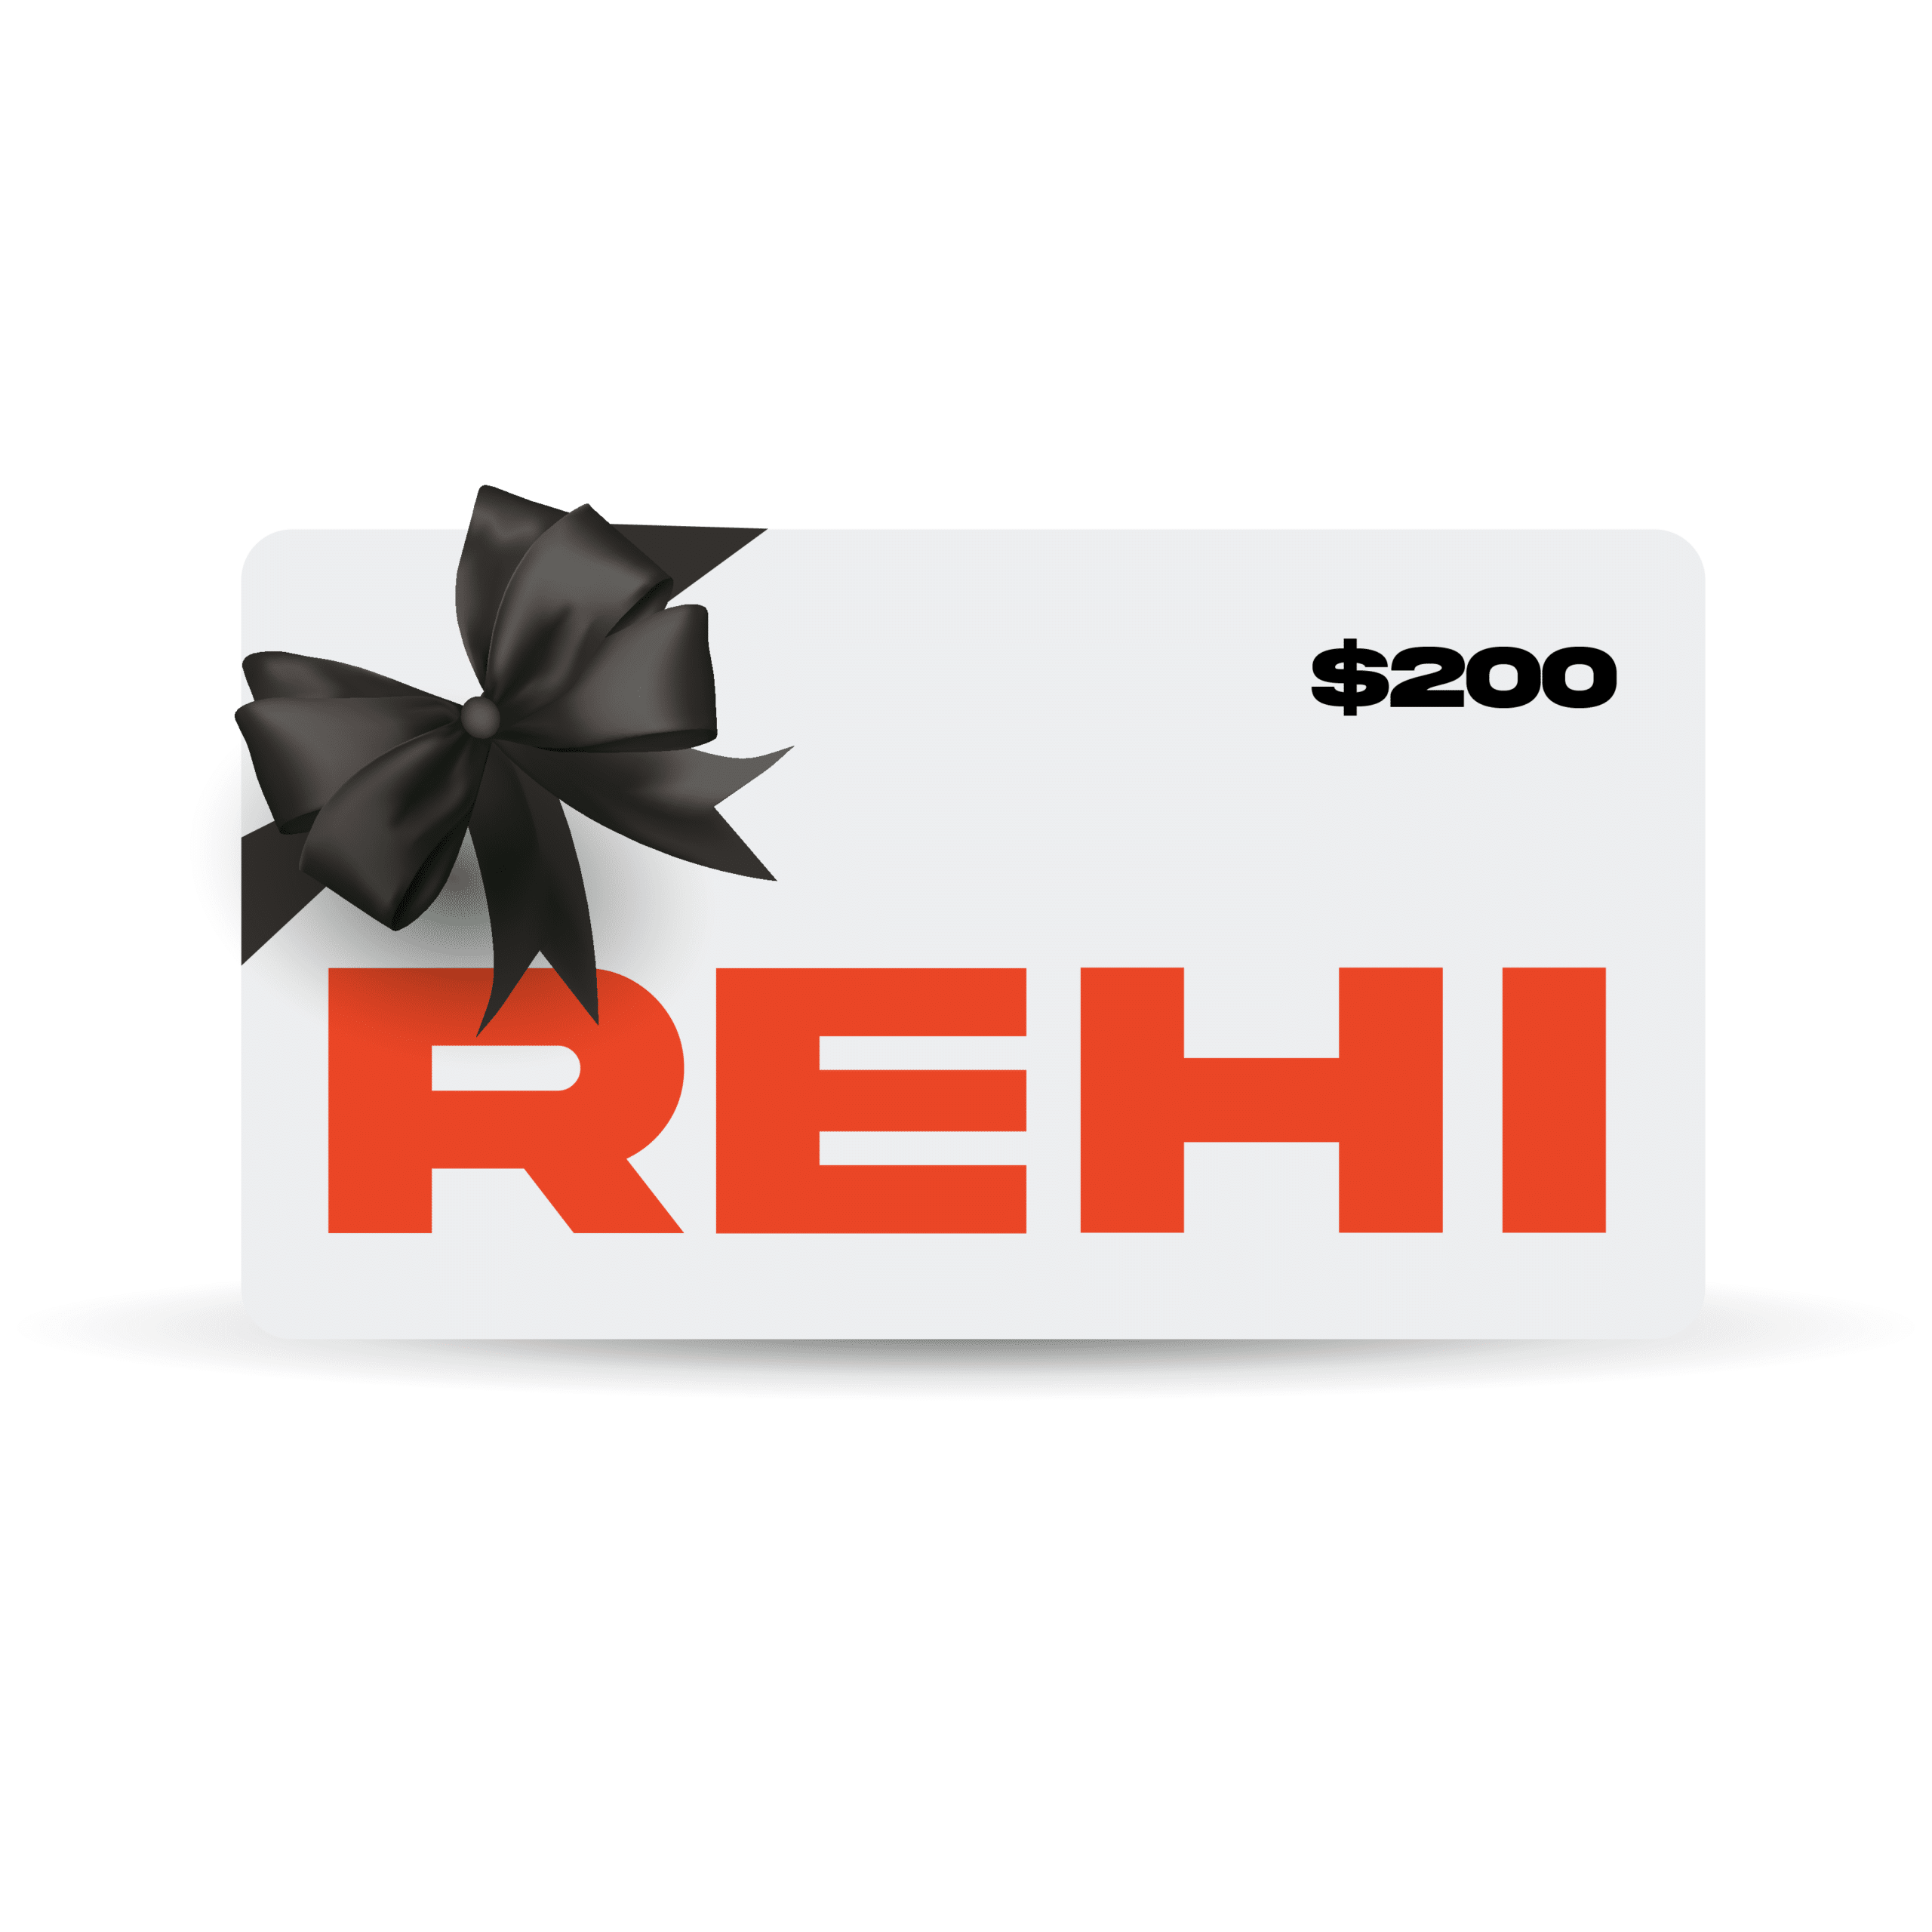 attribute_gift-card-amount: $200